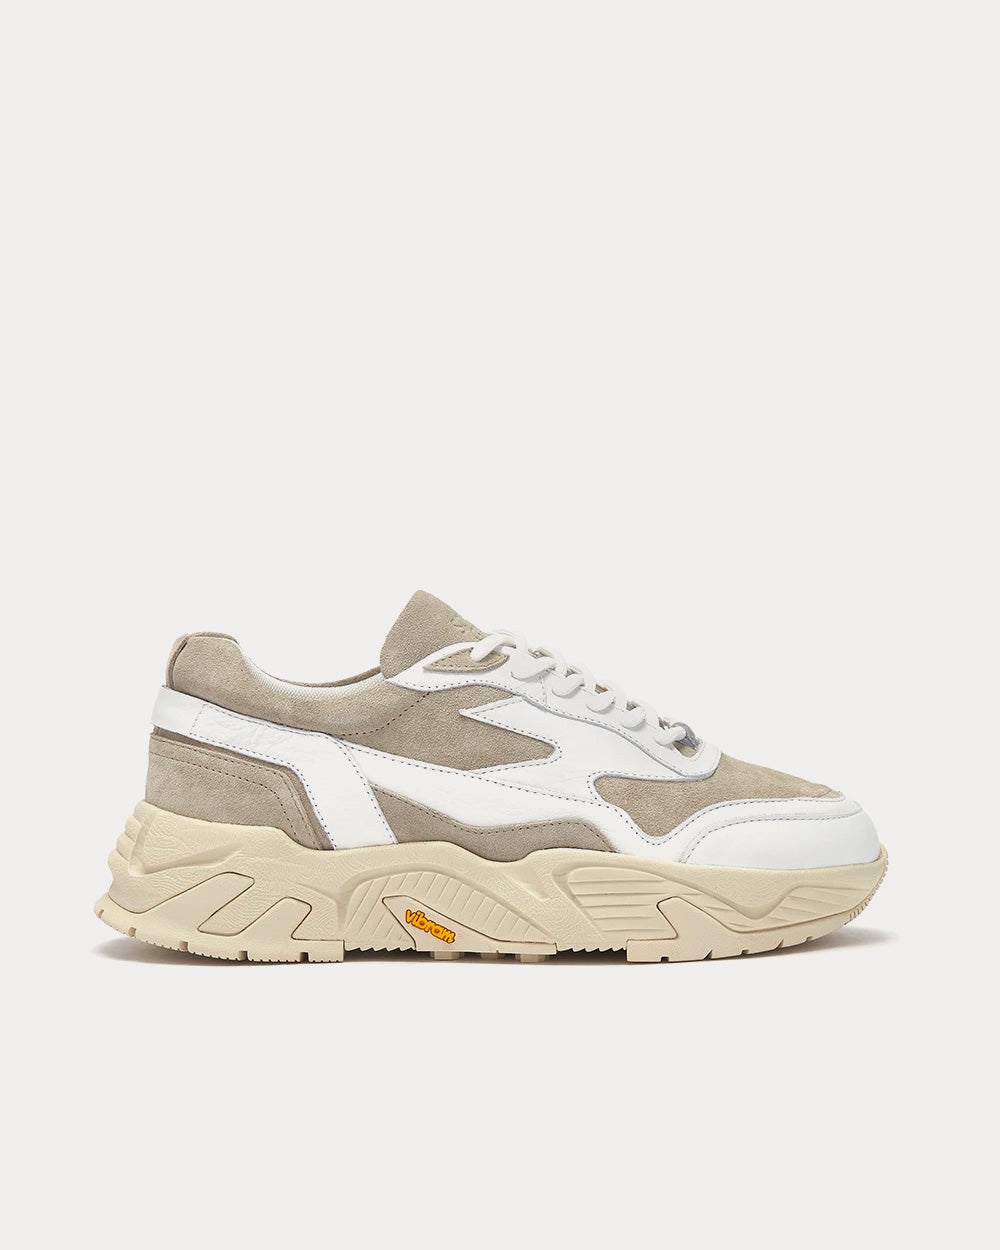 Soho Grit - The Hollen Stone Off-White Low Top Sneakers